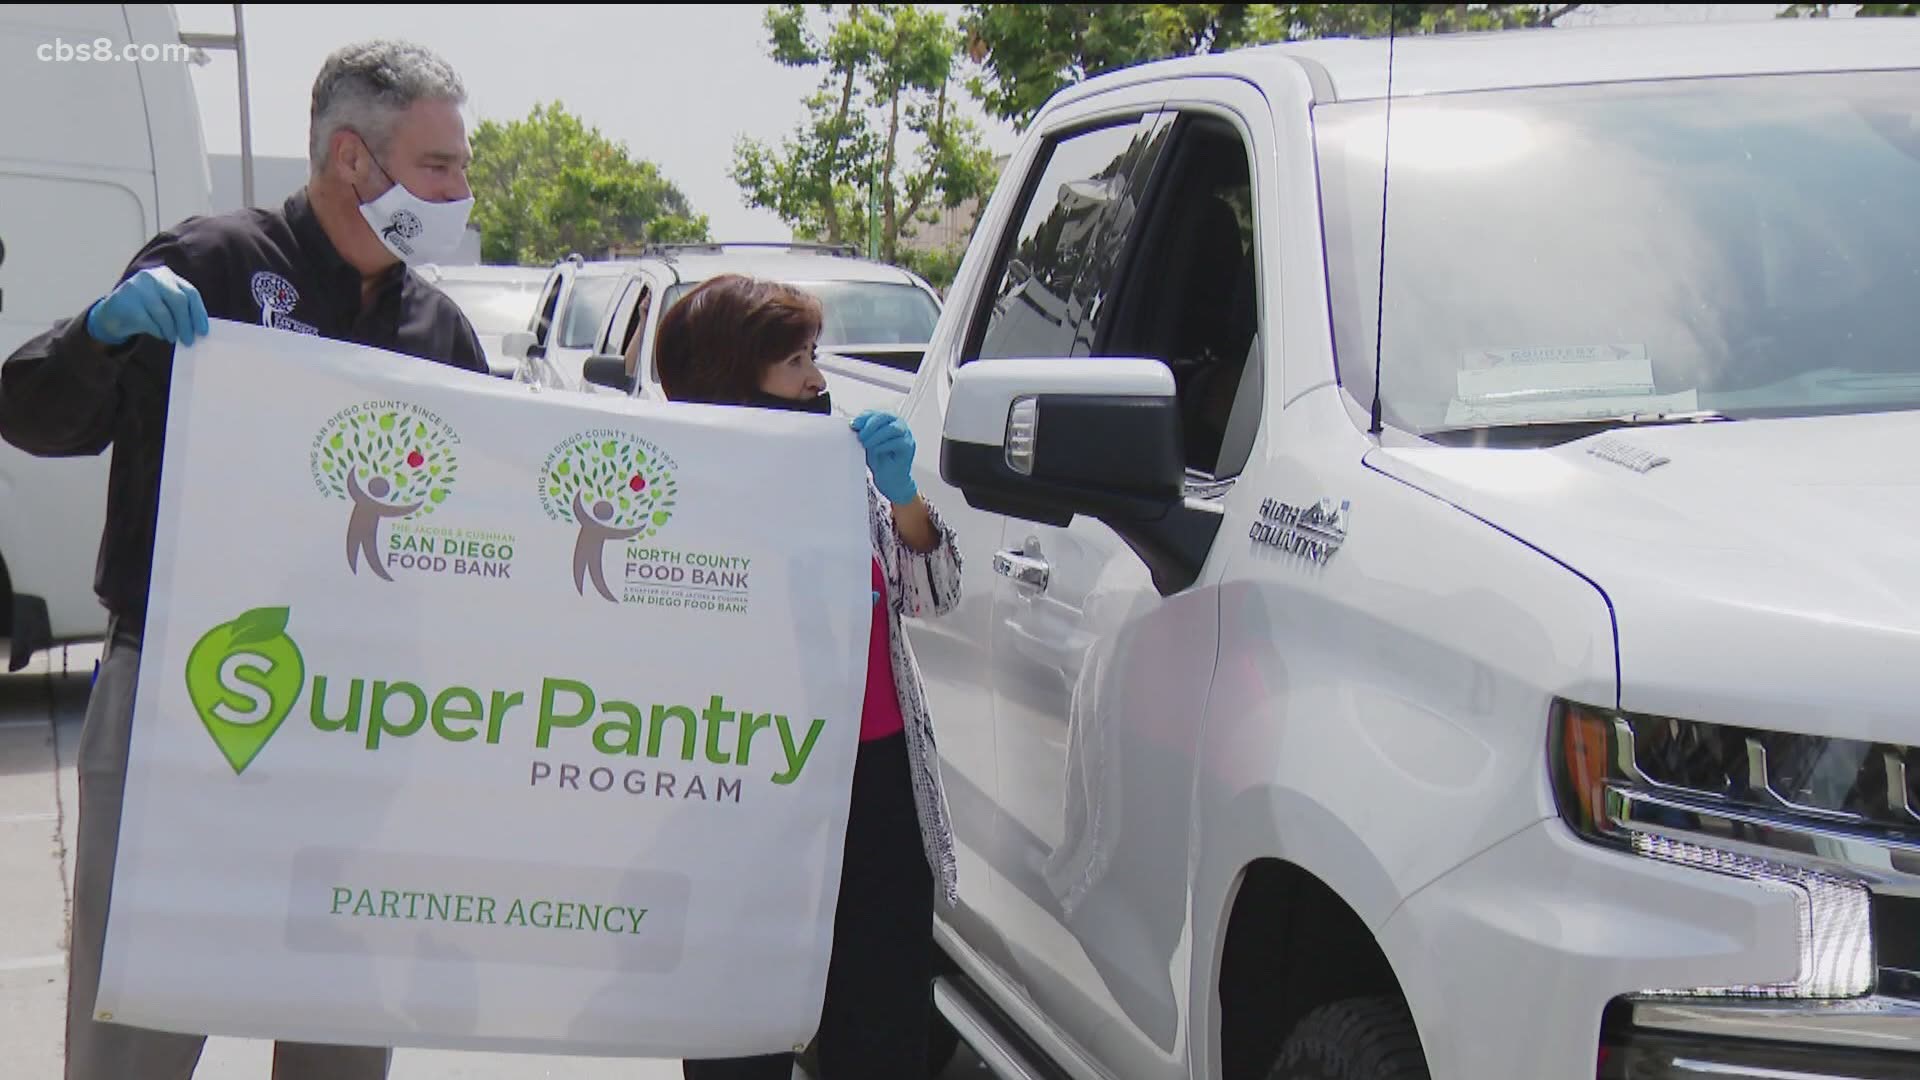 The Food Bank’s “Super Pantry Program” will help meet the skyrocketing demand for food assistance from tens of thousands of families impacted by COVID-19.